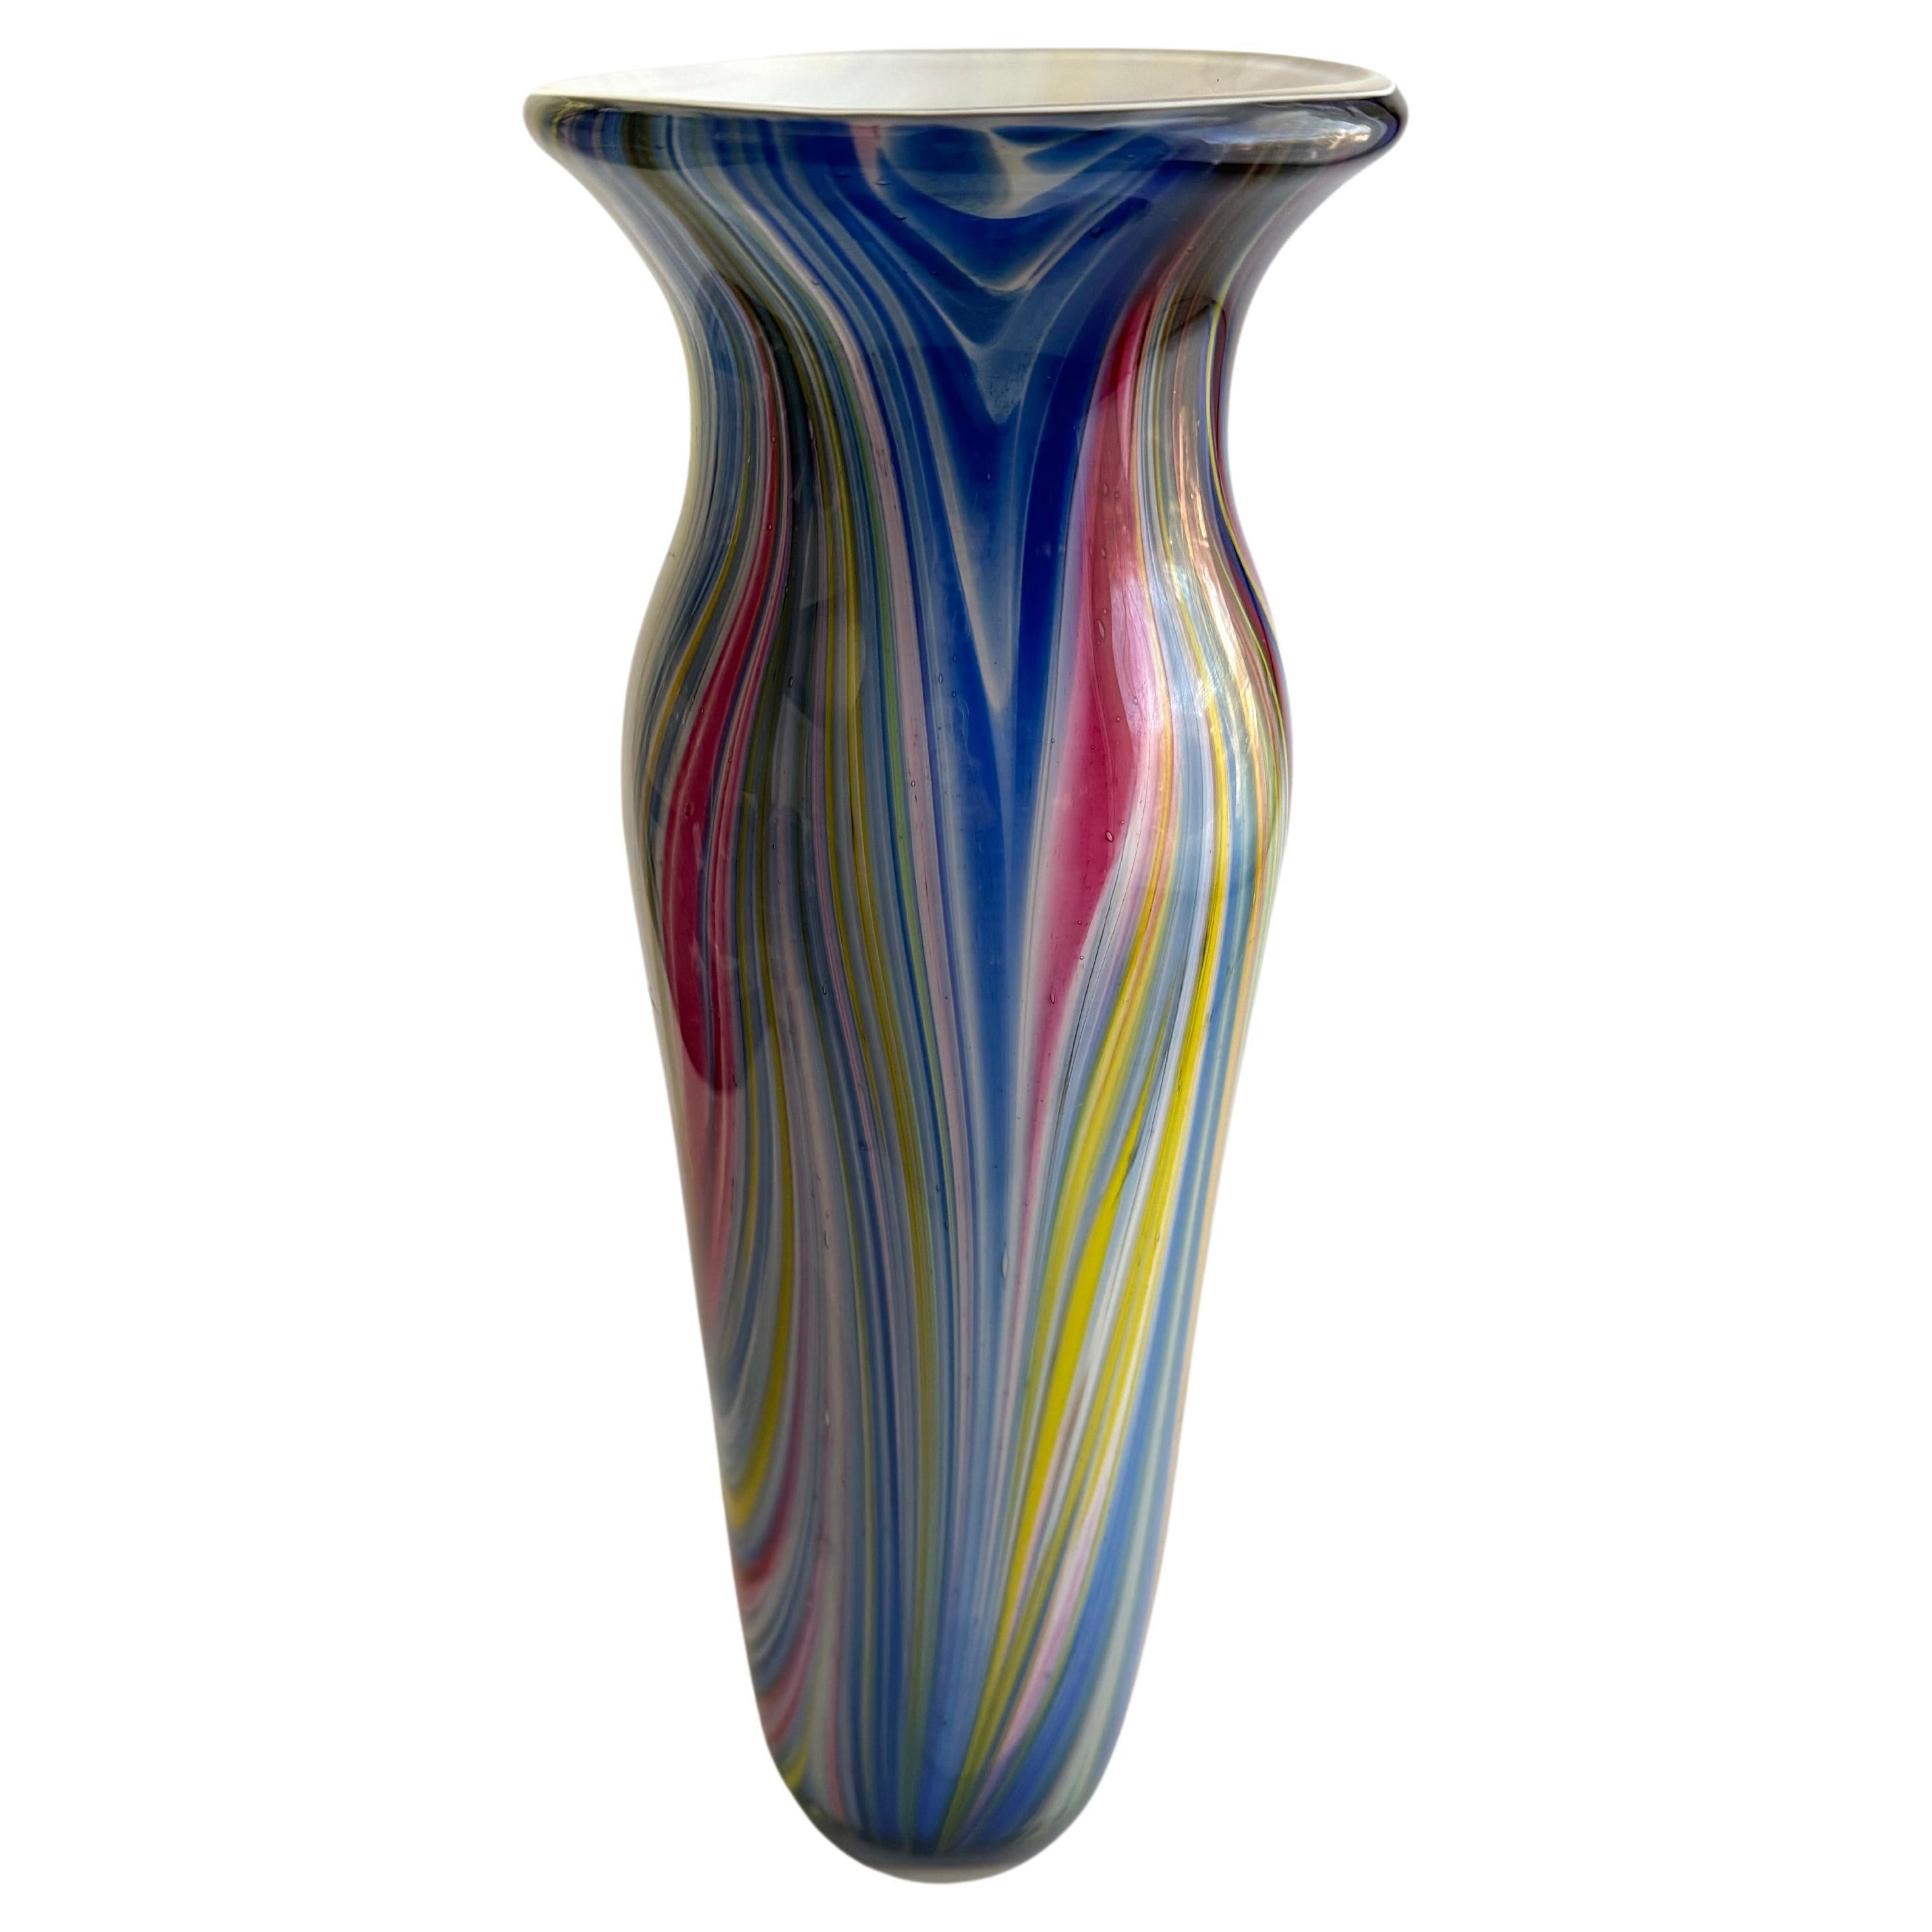 This is a beautiful art glass vase with a style that is reminiscent of Murano glassware. Murano glass is known for its exquisite craftsmanship and vibrant, multi-colored designs, often featuring swirls and twists that make each piece unique. The